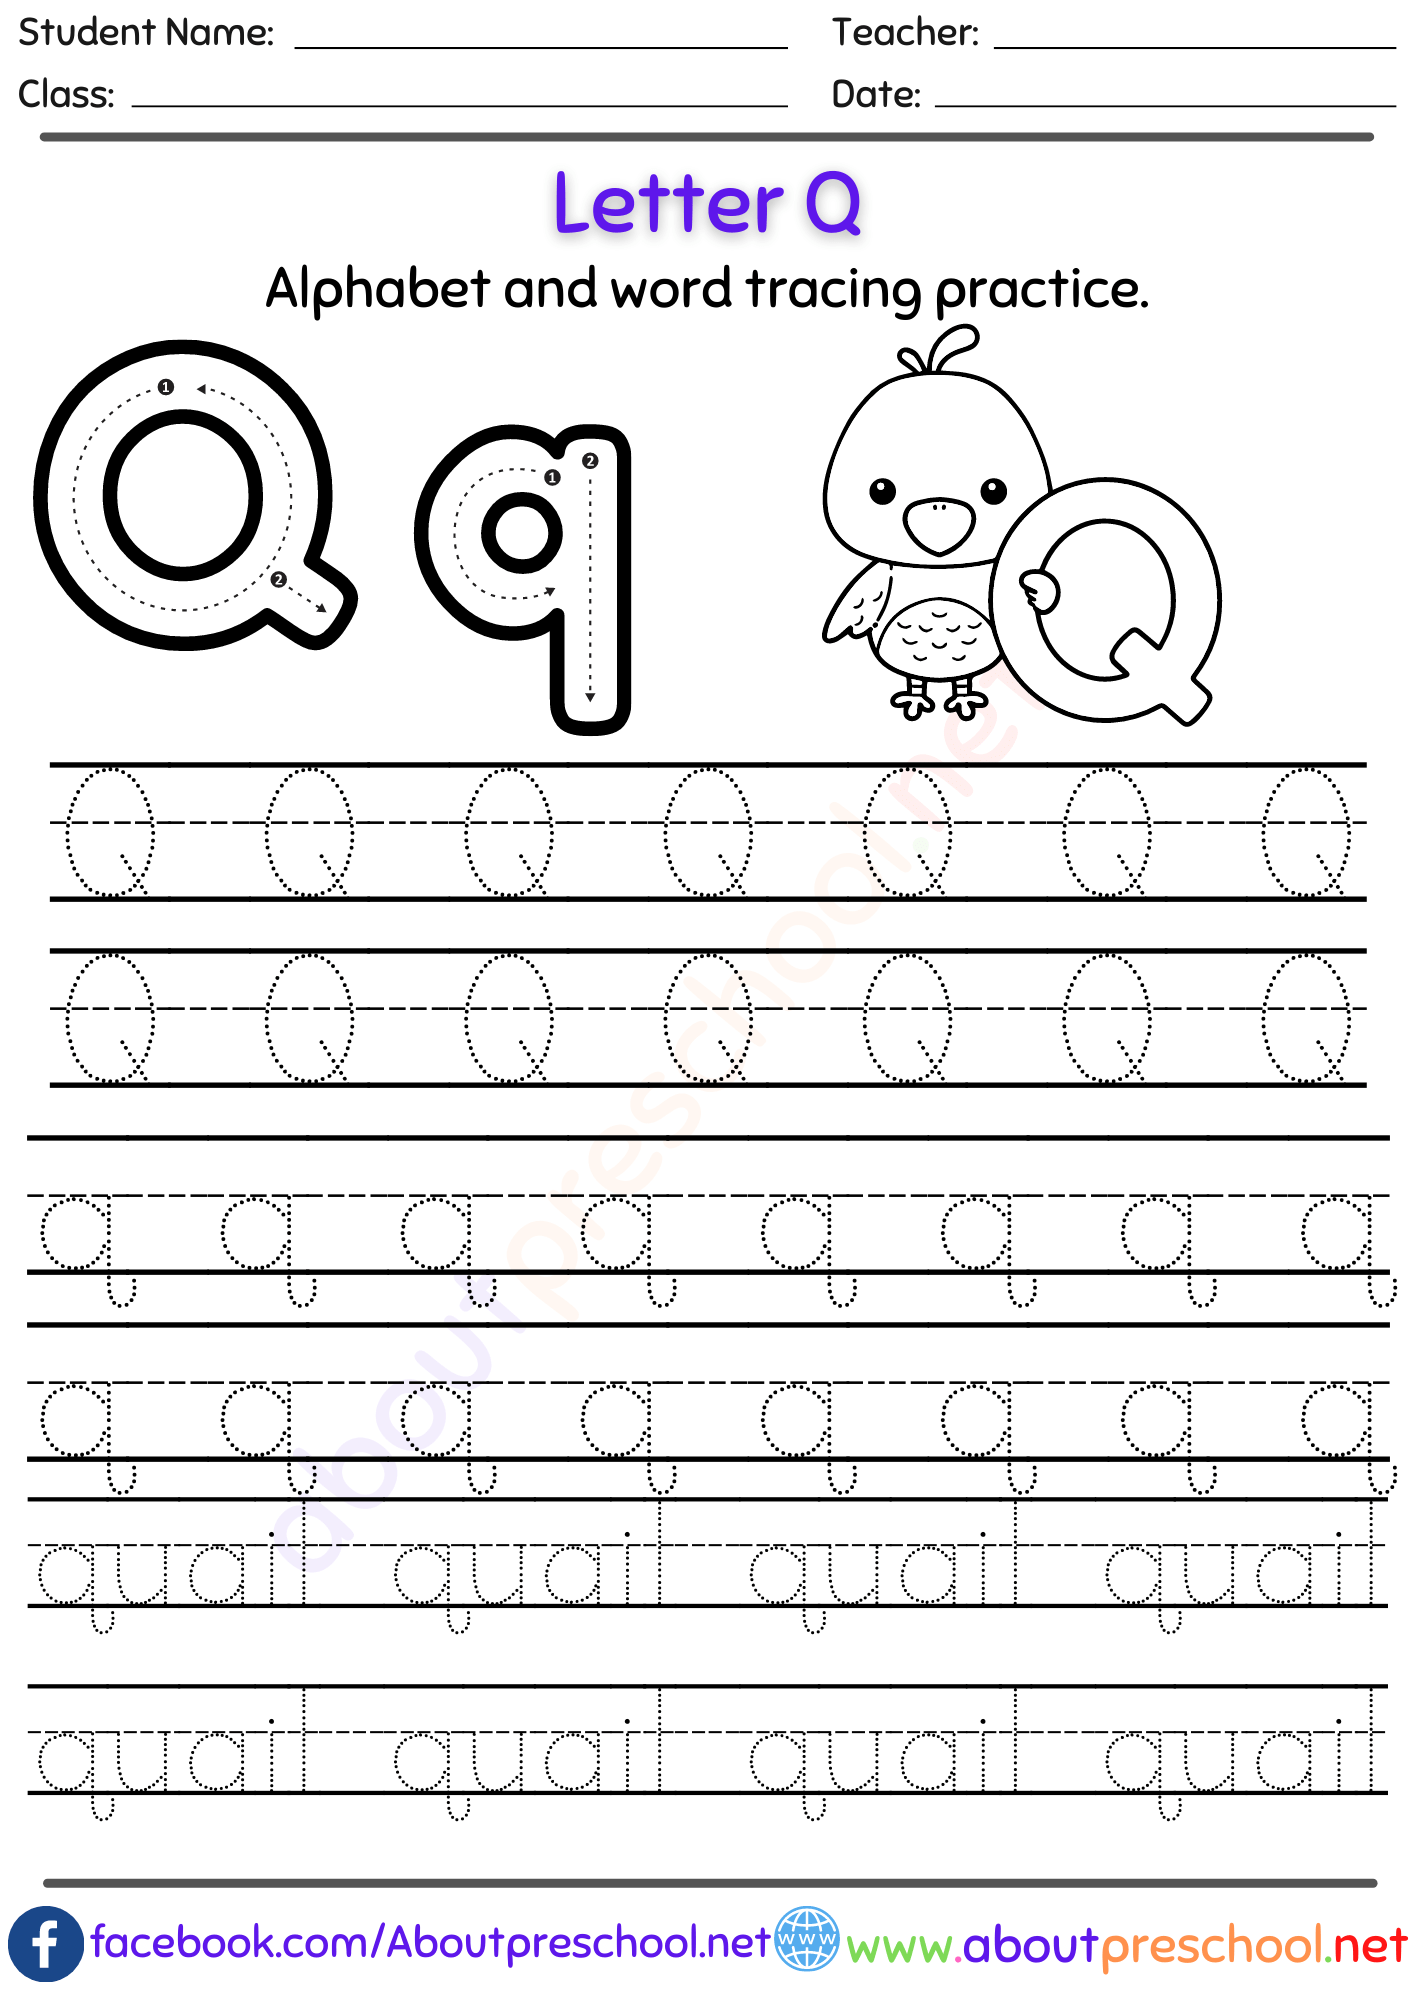 Free Letter Q Alphabet tracing worksheets